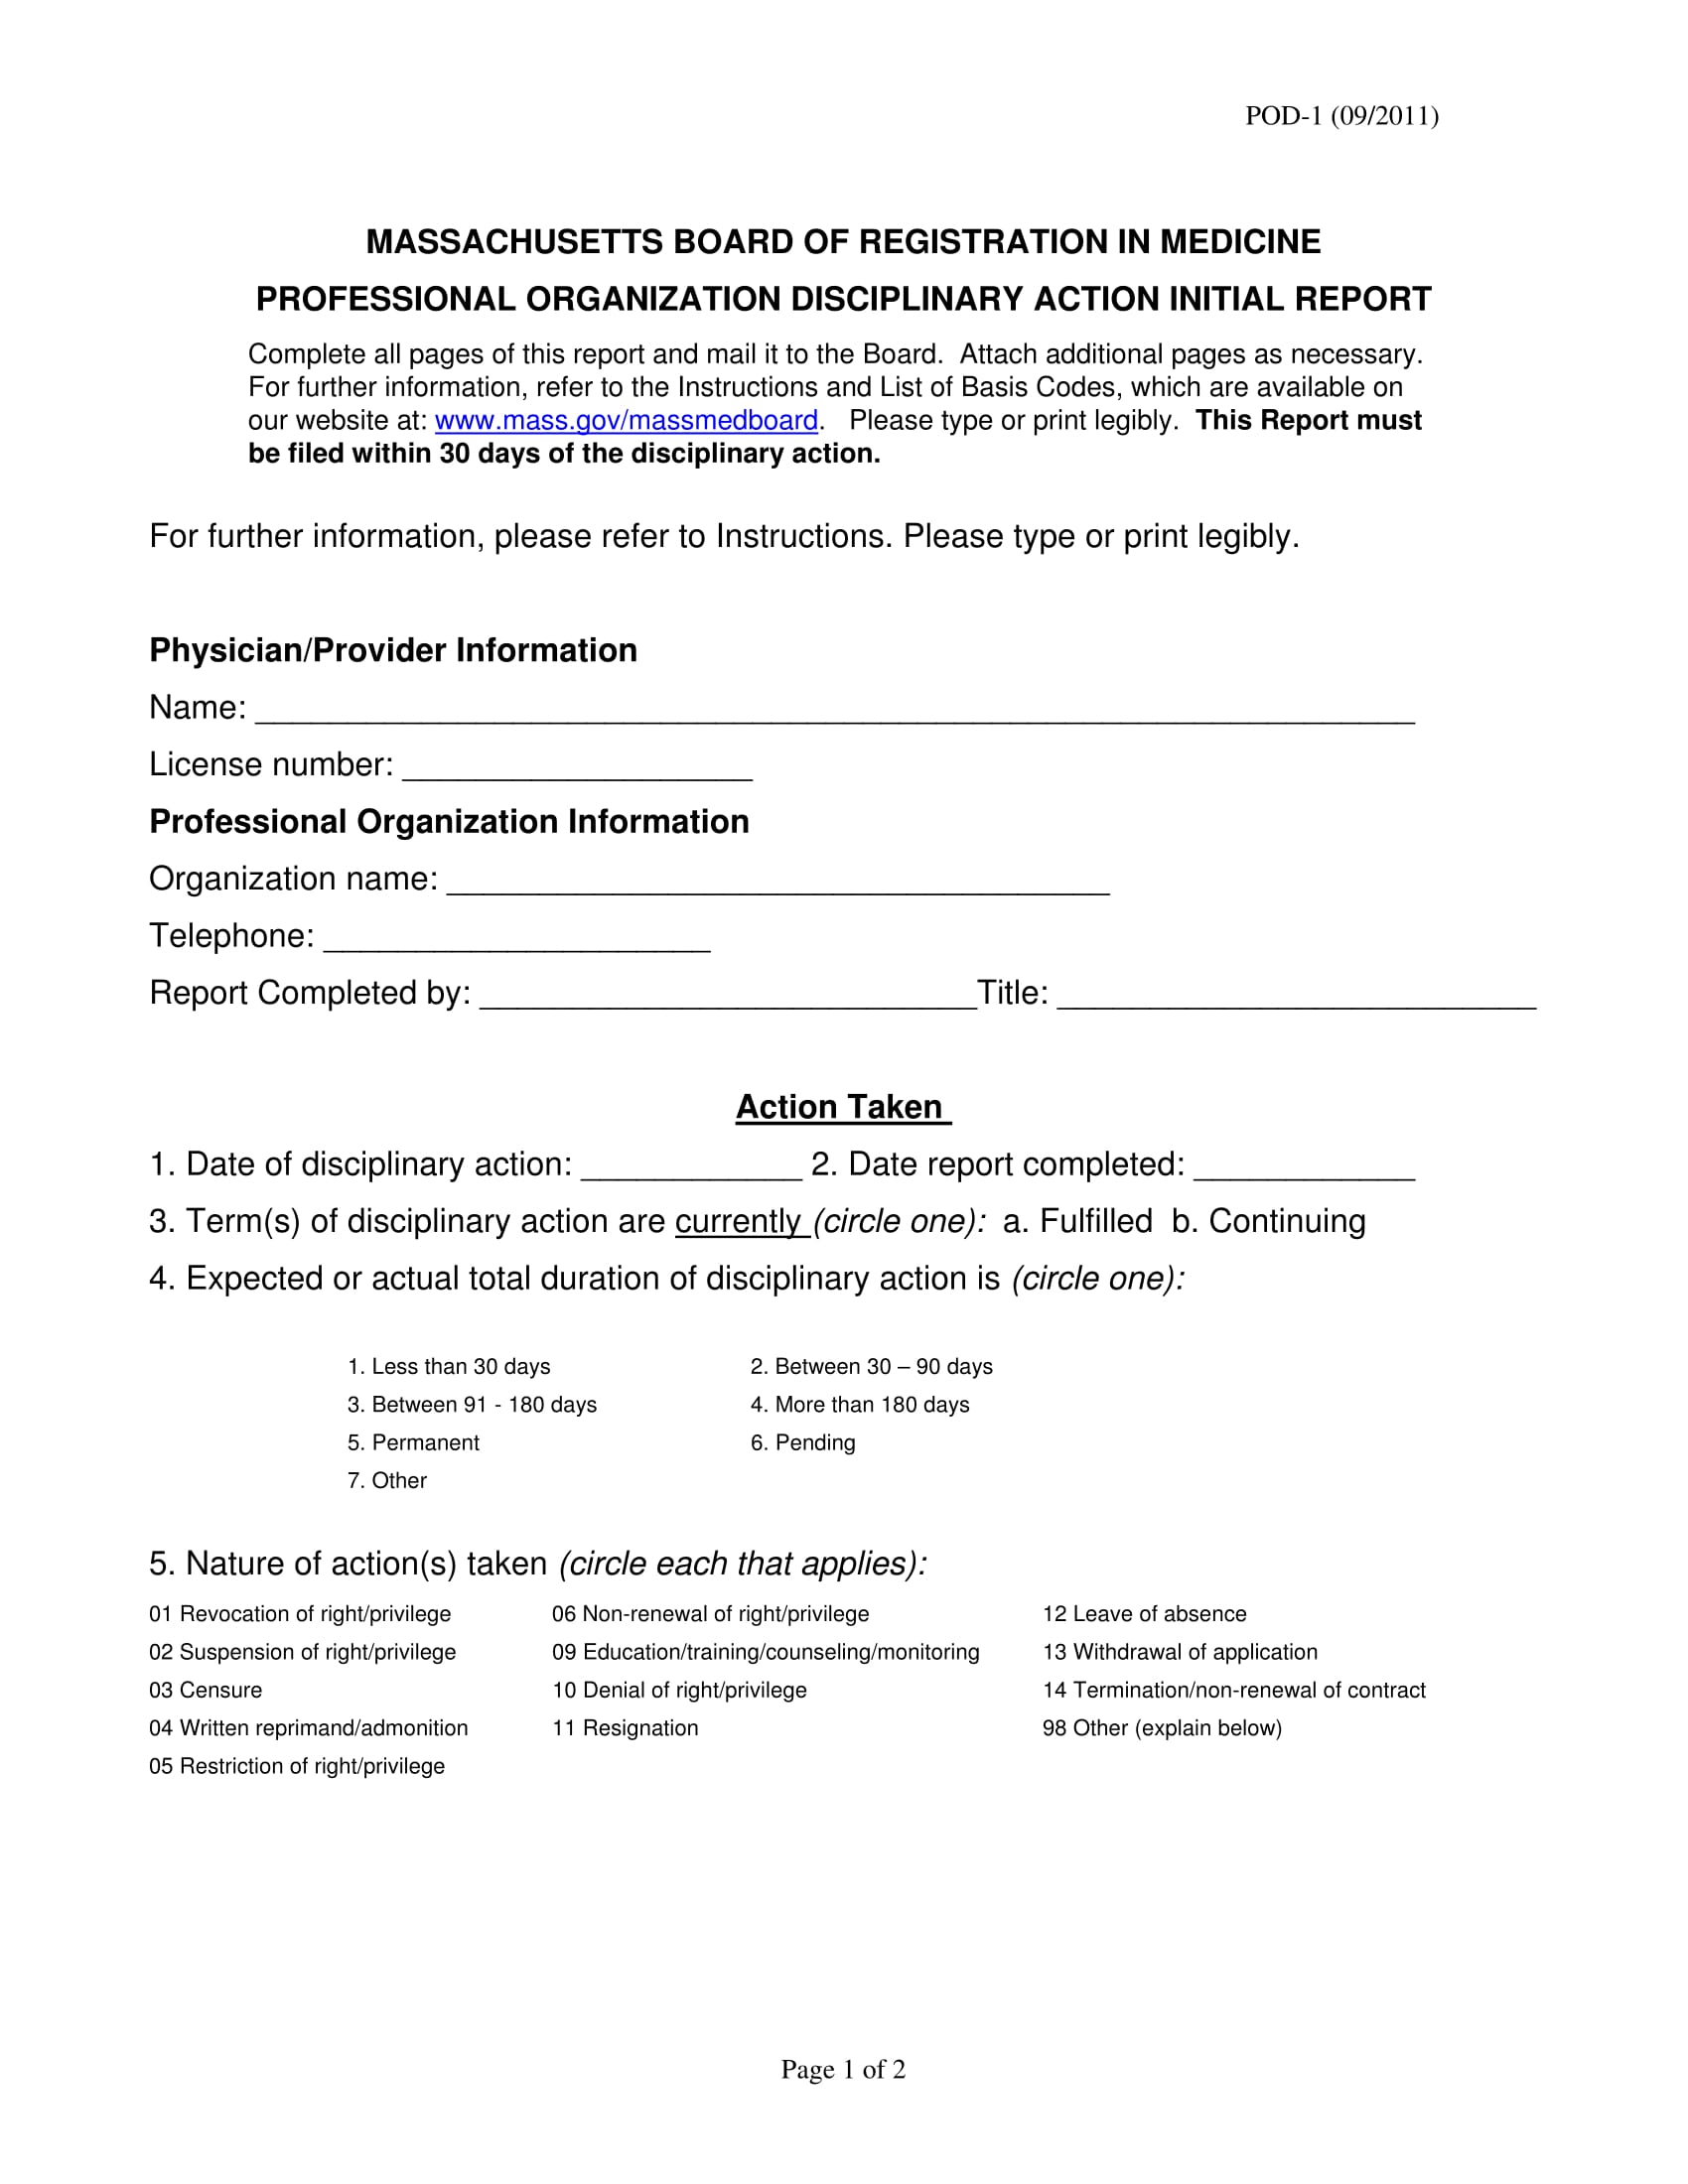 professional disciplinary action report form 1